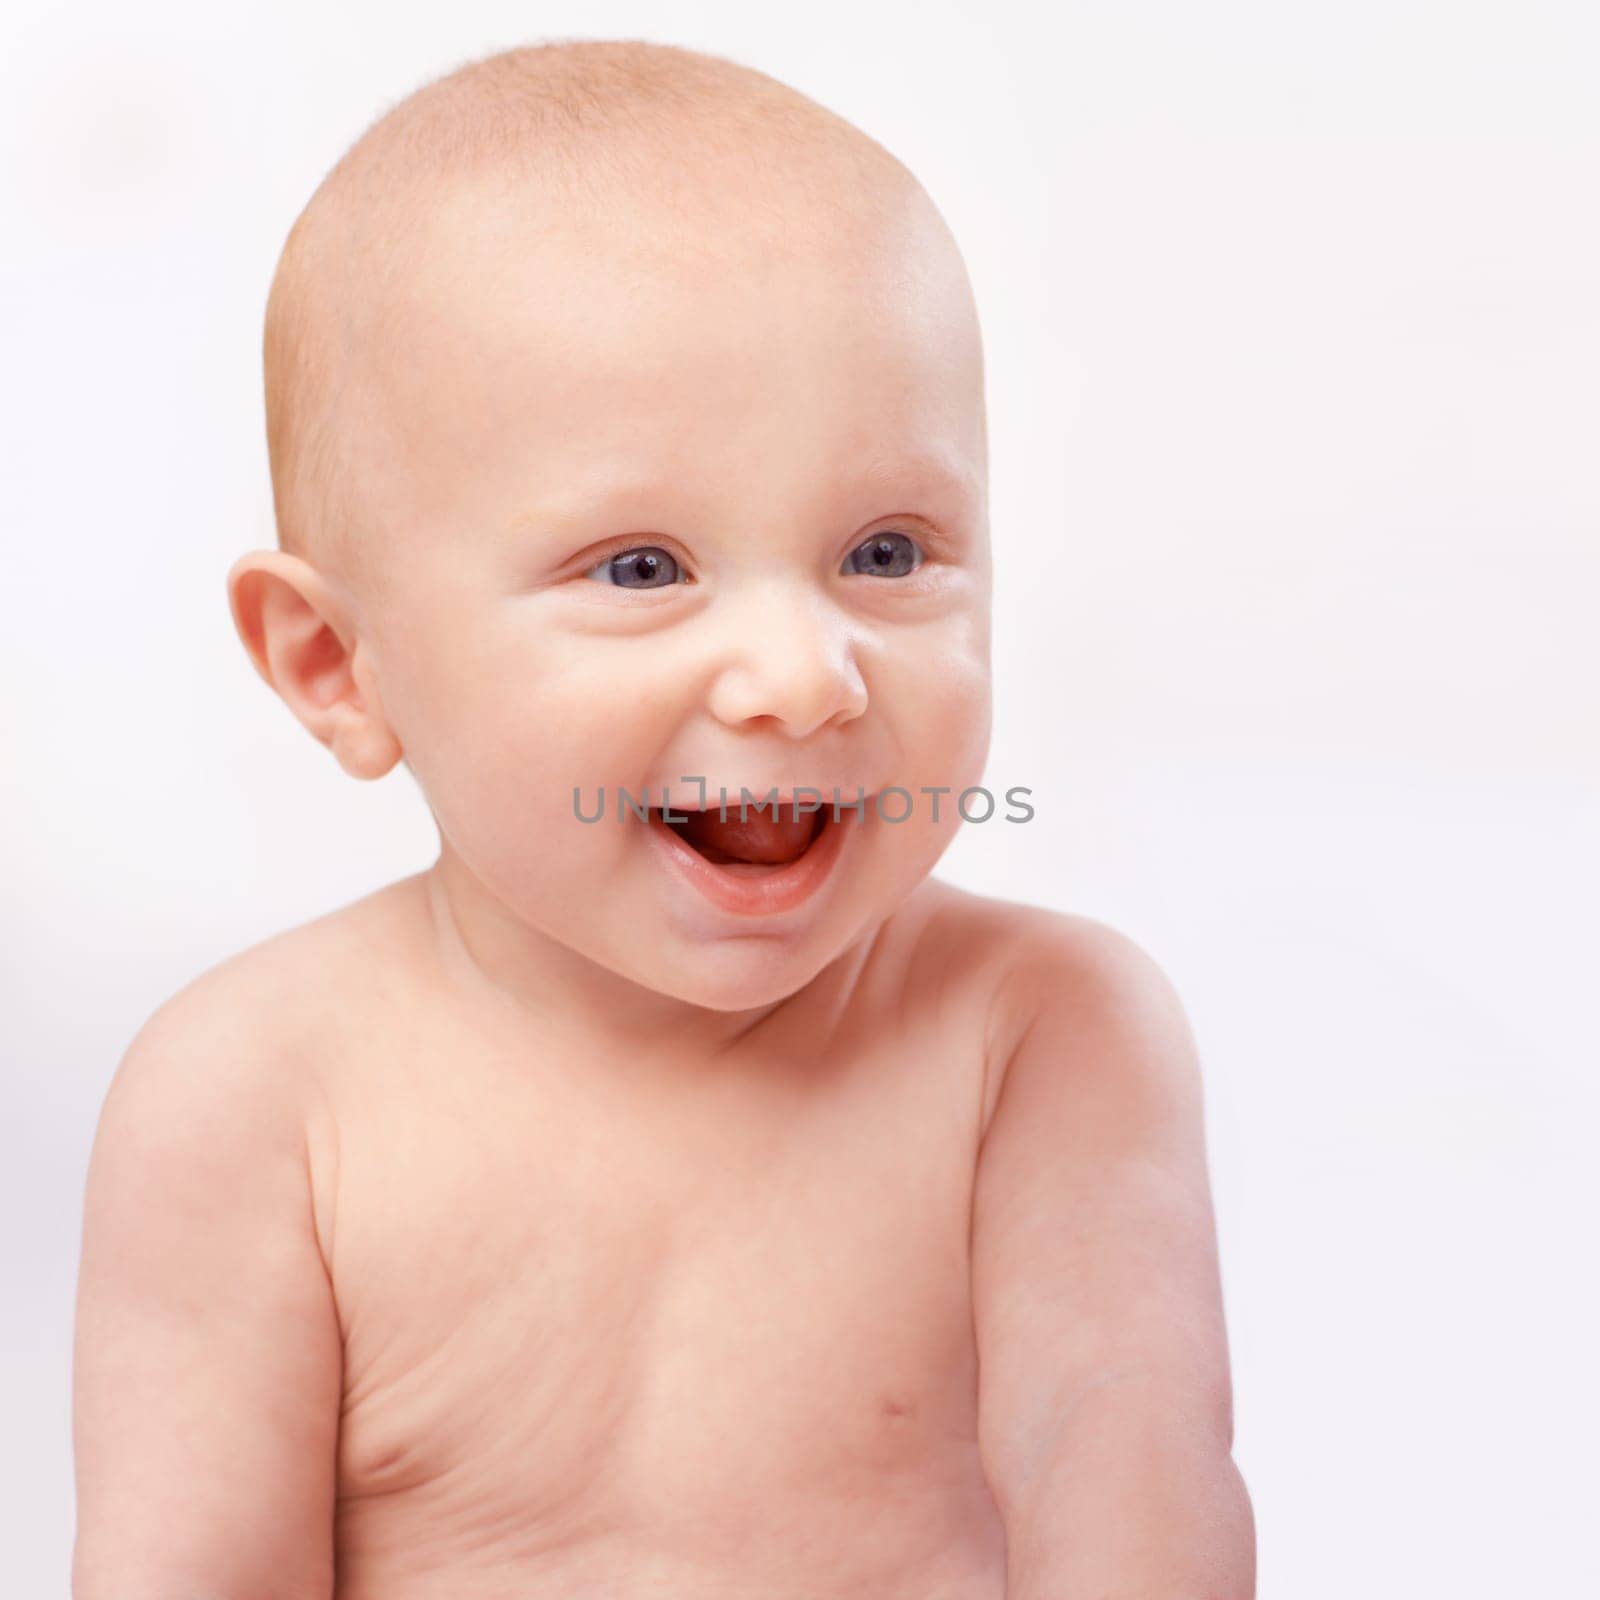 Young, happy and face of baby on a white background for child development, laugh and growth. Curious, facial expression and closeup of isolated newborn for childhood, wellness and adorable in studio.